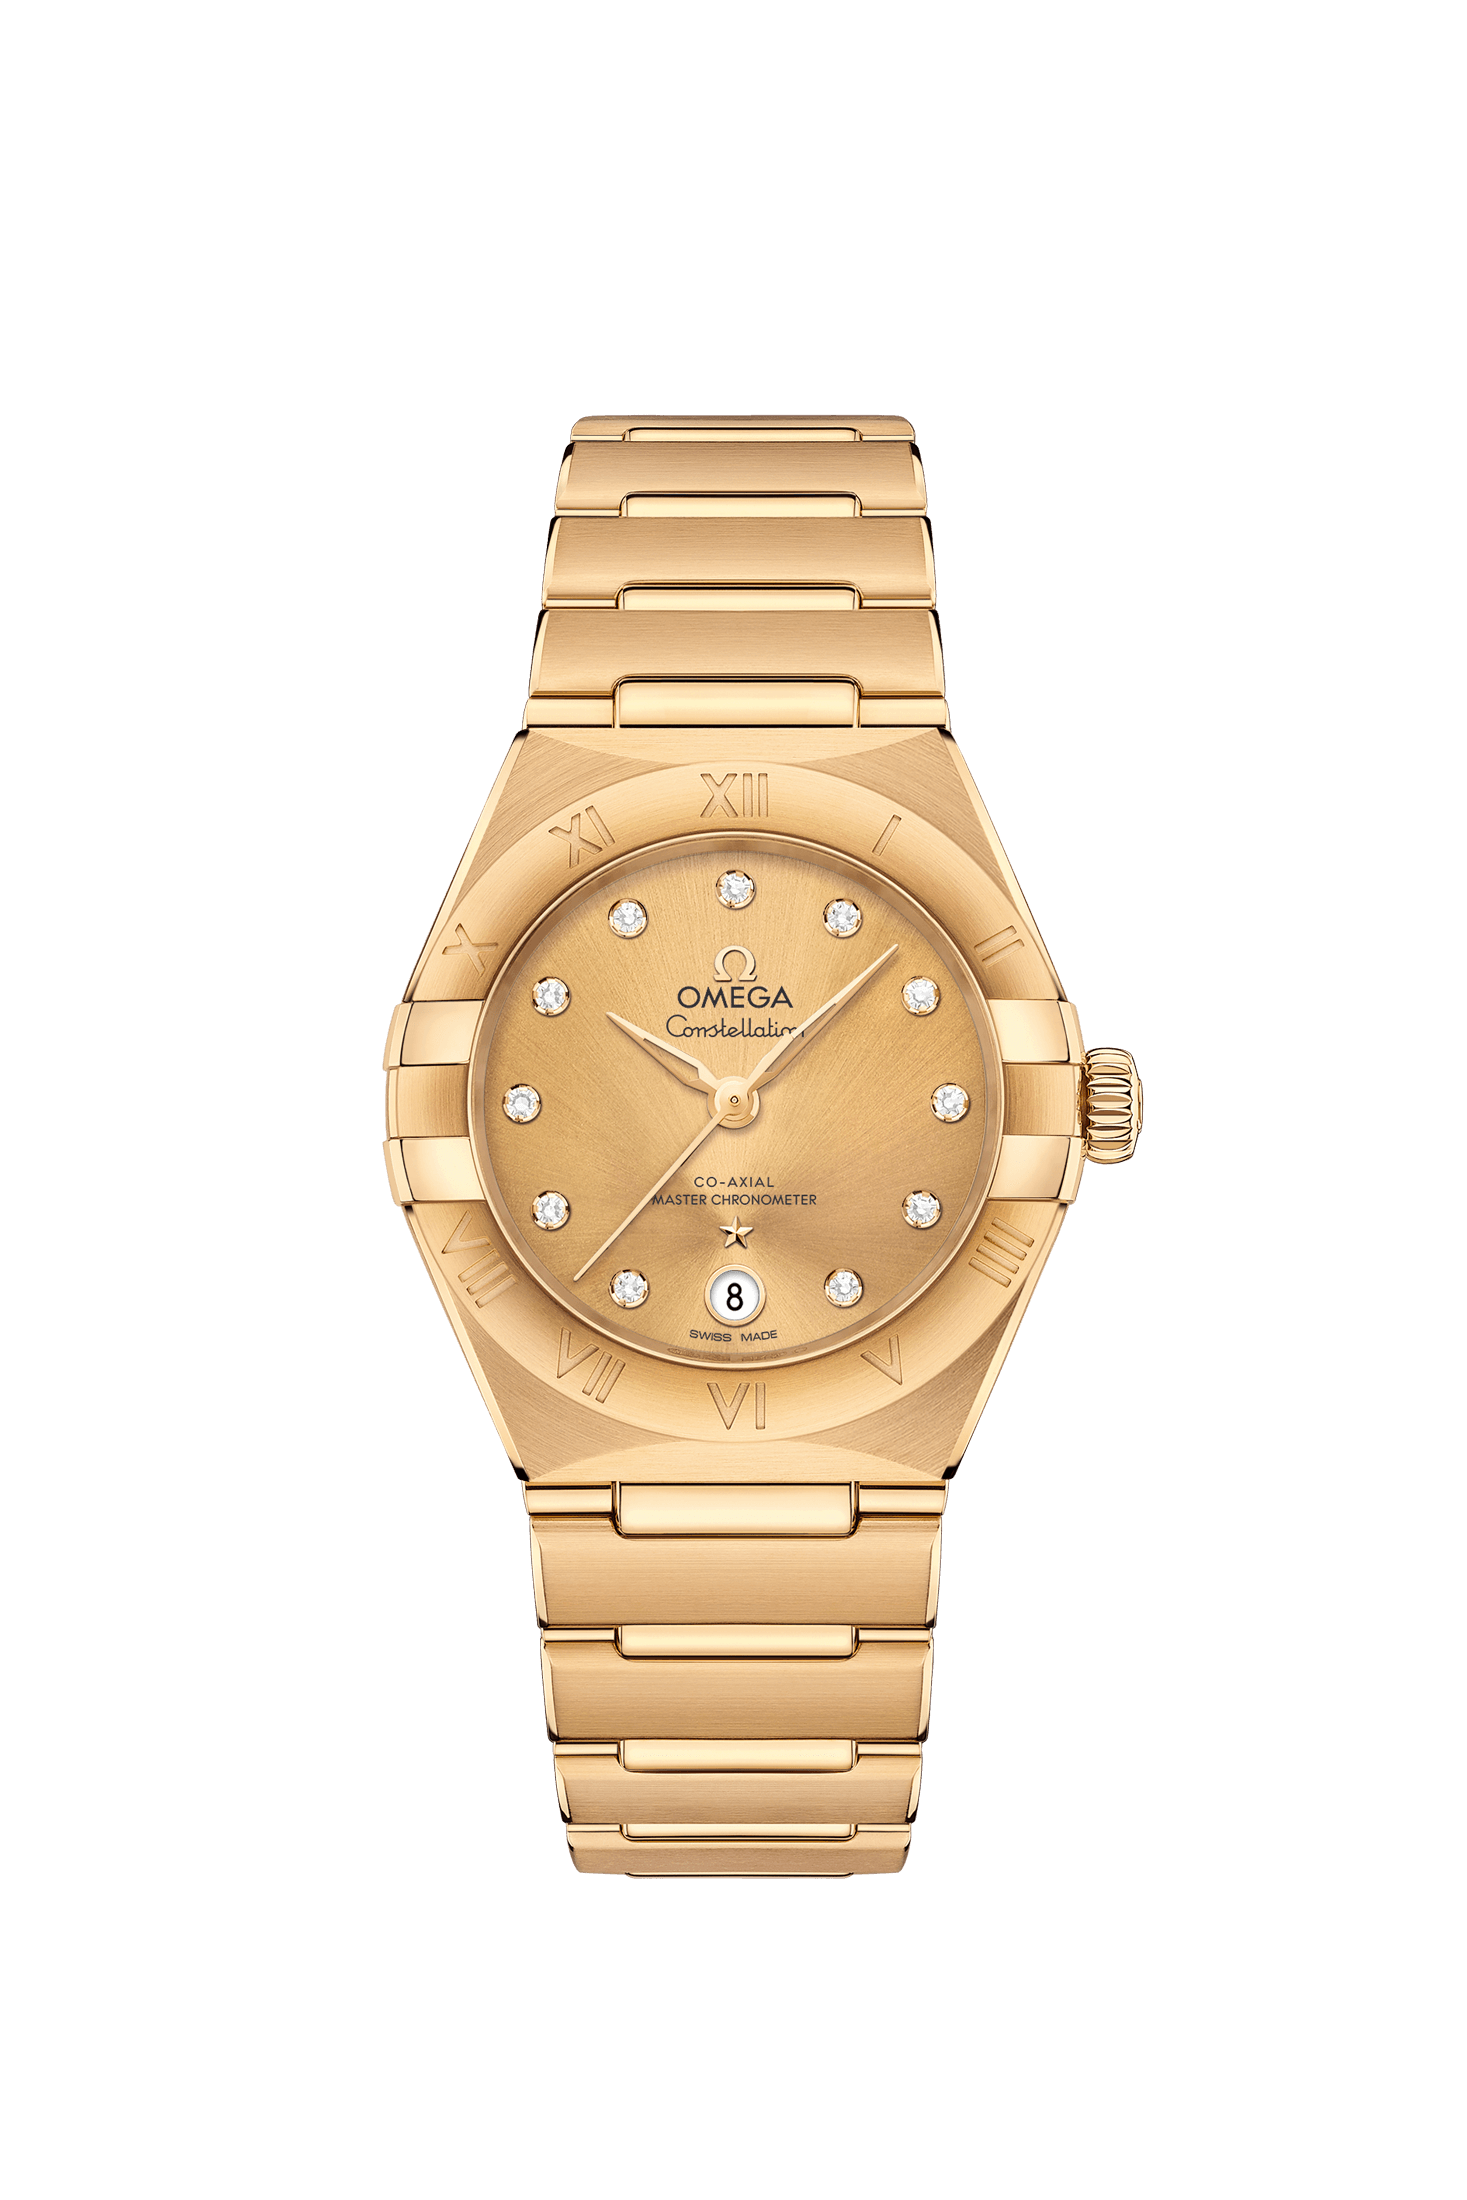 Ladies' watch  OMEGA, Constellation Co Axial Master Chronometer / 29mm, SKU: 131.50.29.20.58.001 | watchapproach.com